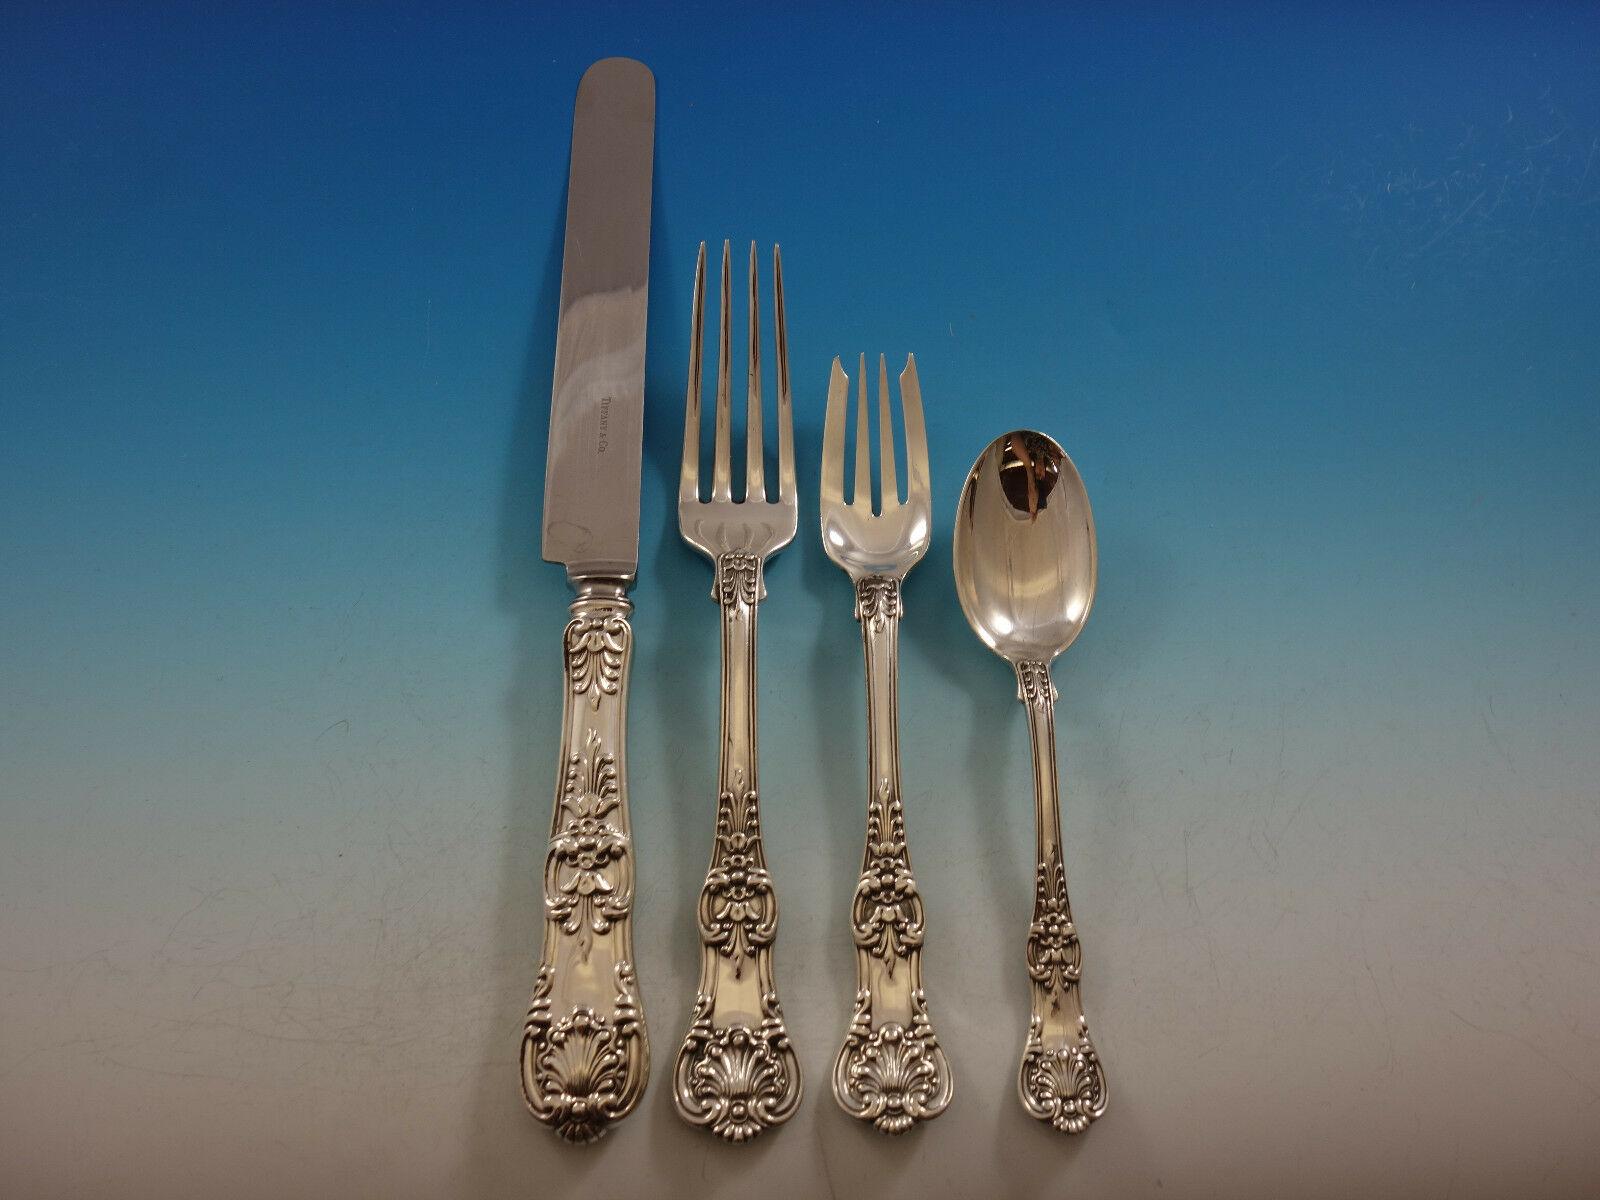 English King by Tiffany & Co. sterling silver flatware set, 42 pieces. This set includes:

6 dinner size knives, 10 3/8